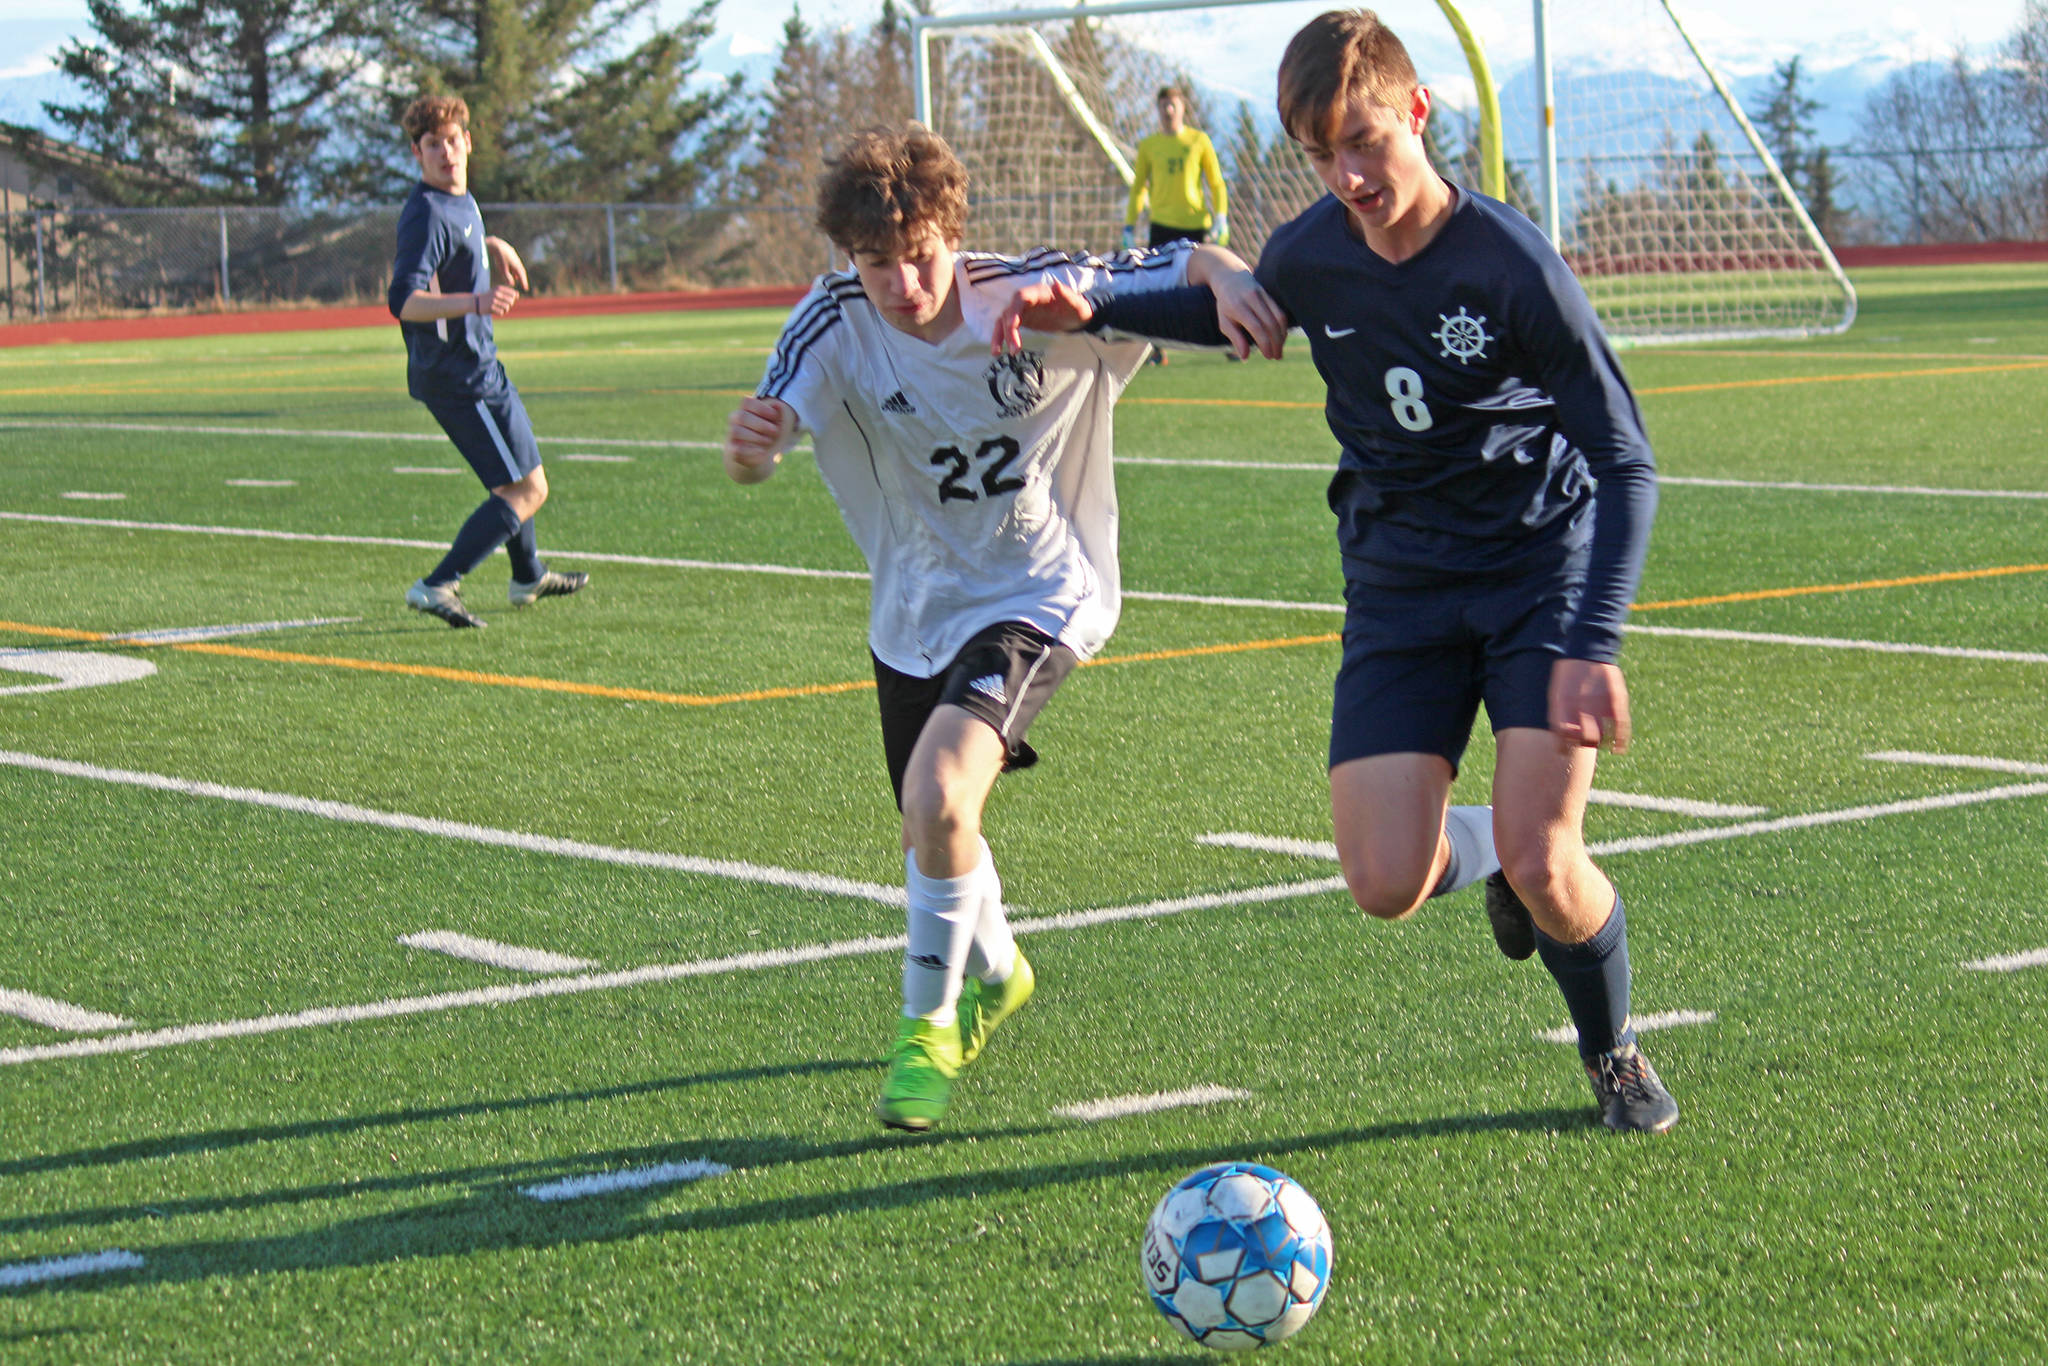 Homer’s Clayton Beachy fights with Kenai’s Francisco Garmen Munarriz for possession of the ball during a Tuesday, April 16, 2019 game at Homer High School in Homer, Alaska. (Photo by Megan Pacer/Homer News)